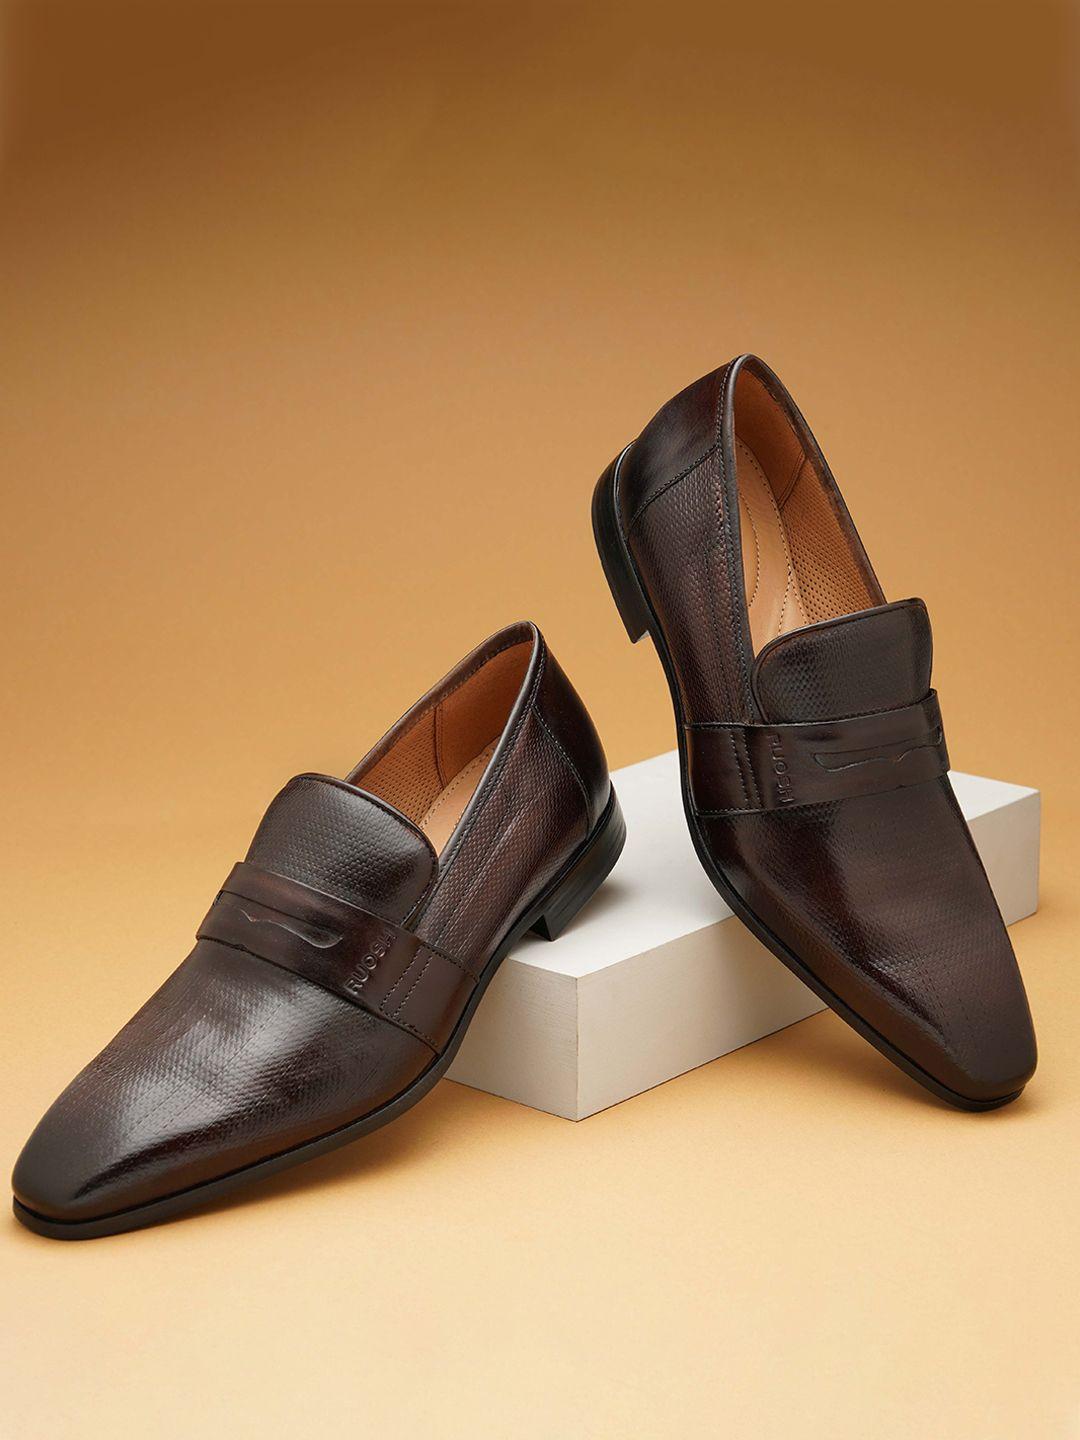 ruosh-men-textured-leather-formal-penny-loafers